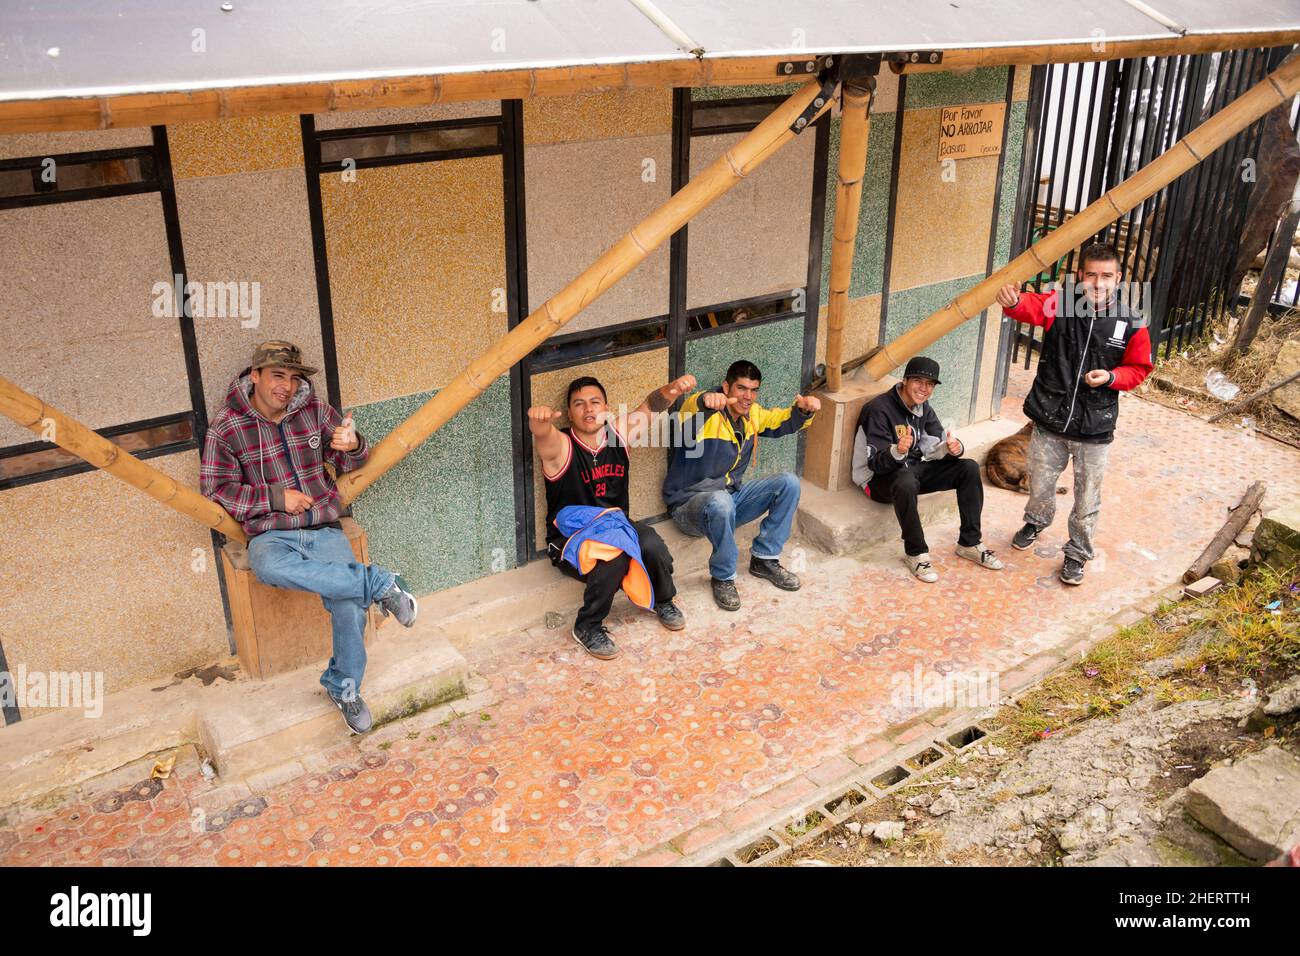 Group of men outside a shack house, in the once notorious gang Barrio Egipto neighbourhood, Bogota, Colombia, South America. Stock Photo